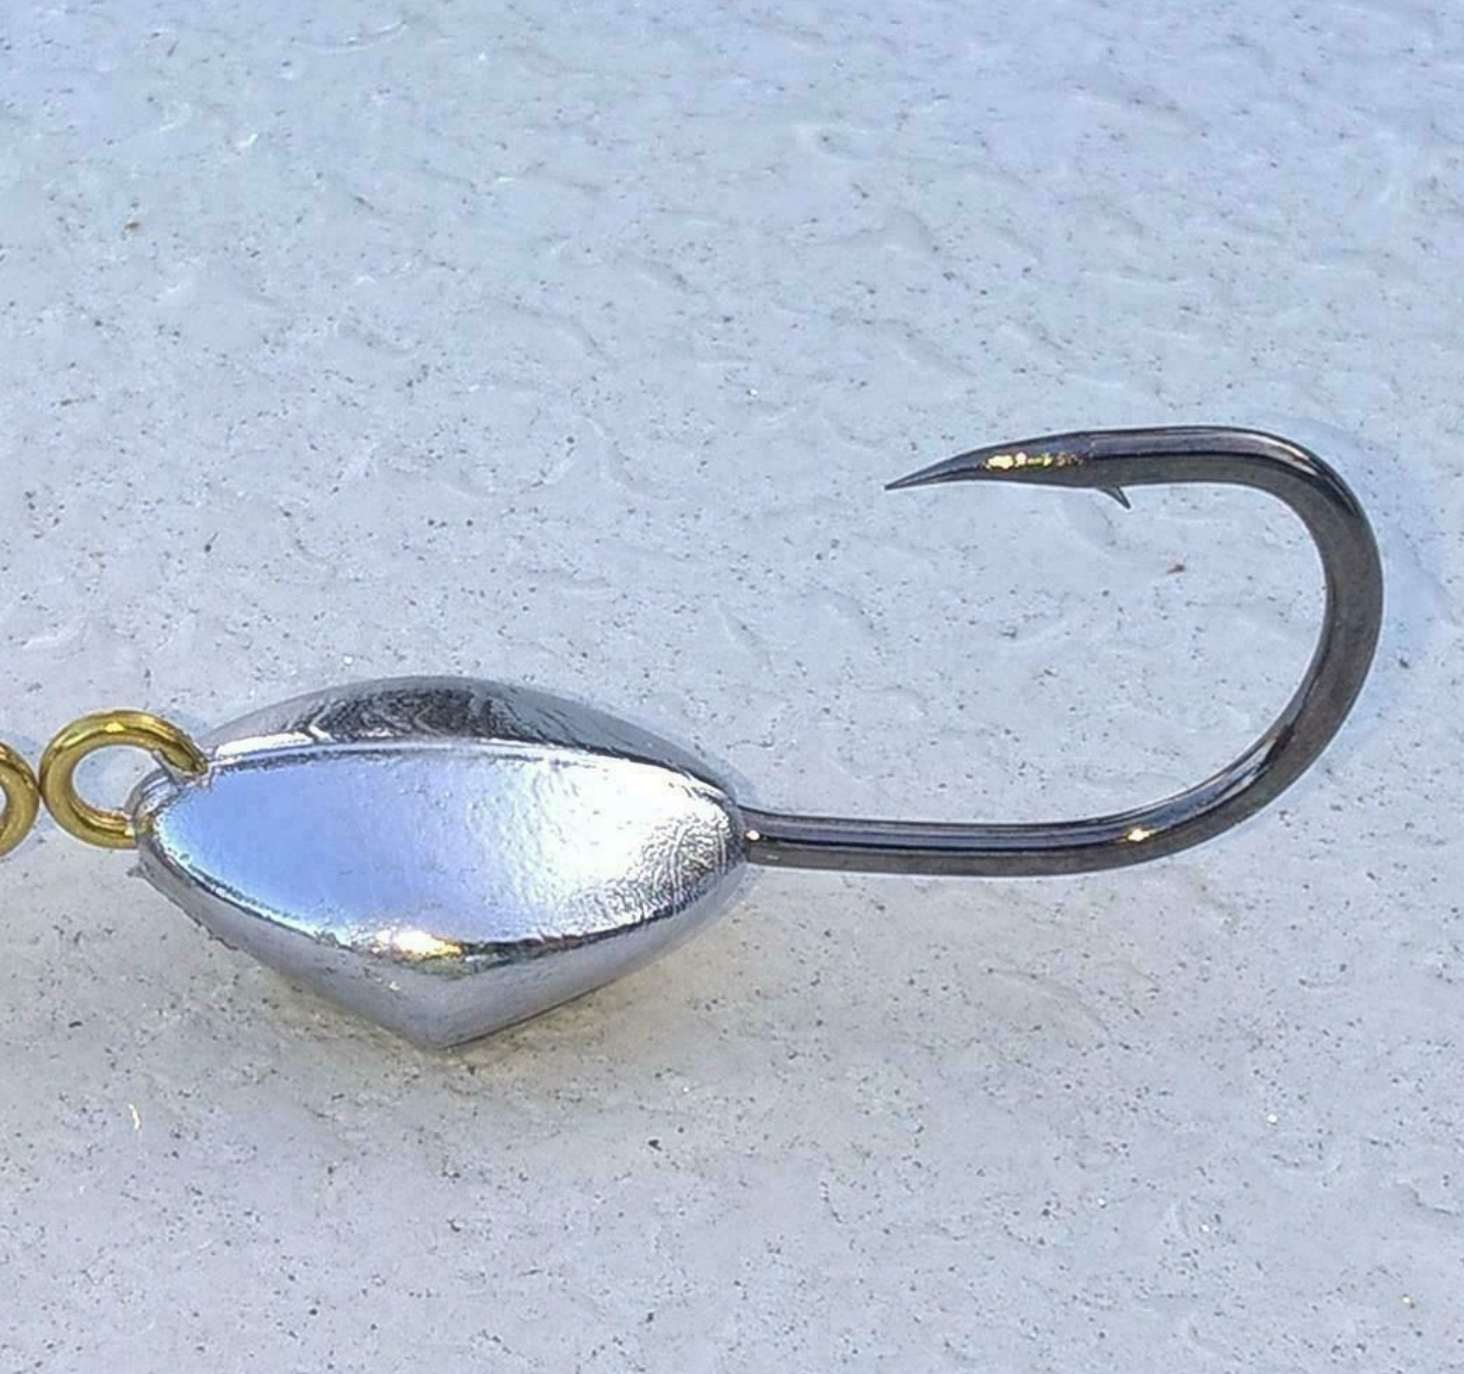 Bottom Sweeper style jig mold? tog blackfish jig - Wire Baits -   - Tackle Building Forums